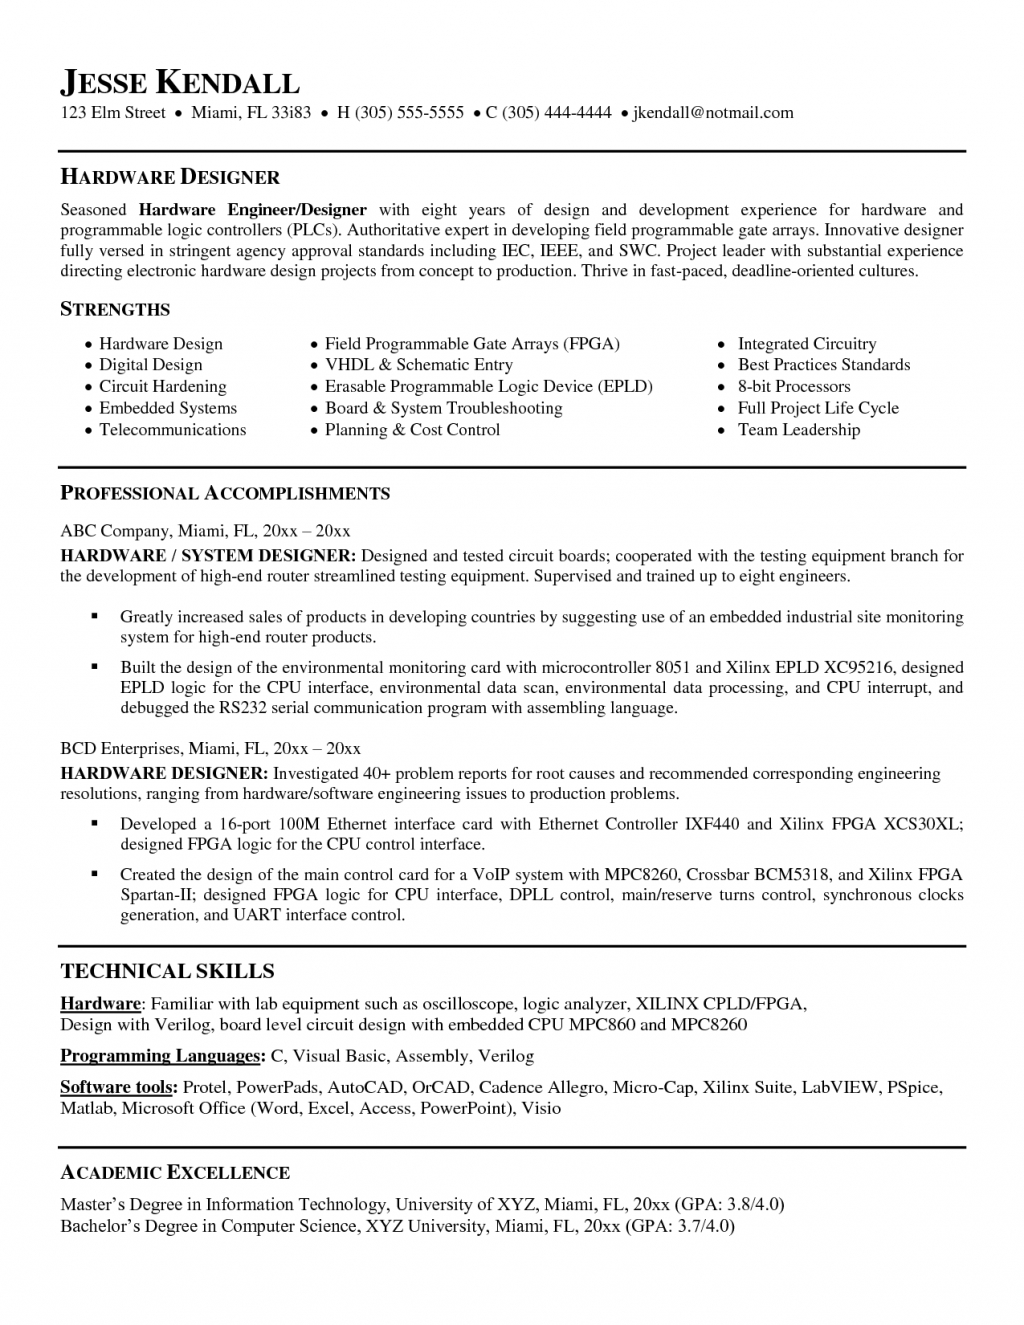 Resume Template Iec Resume Template Simple Awesome Photo with size 1024 X 1325